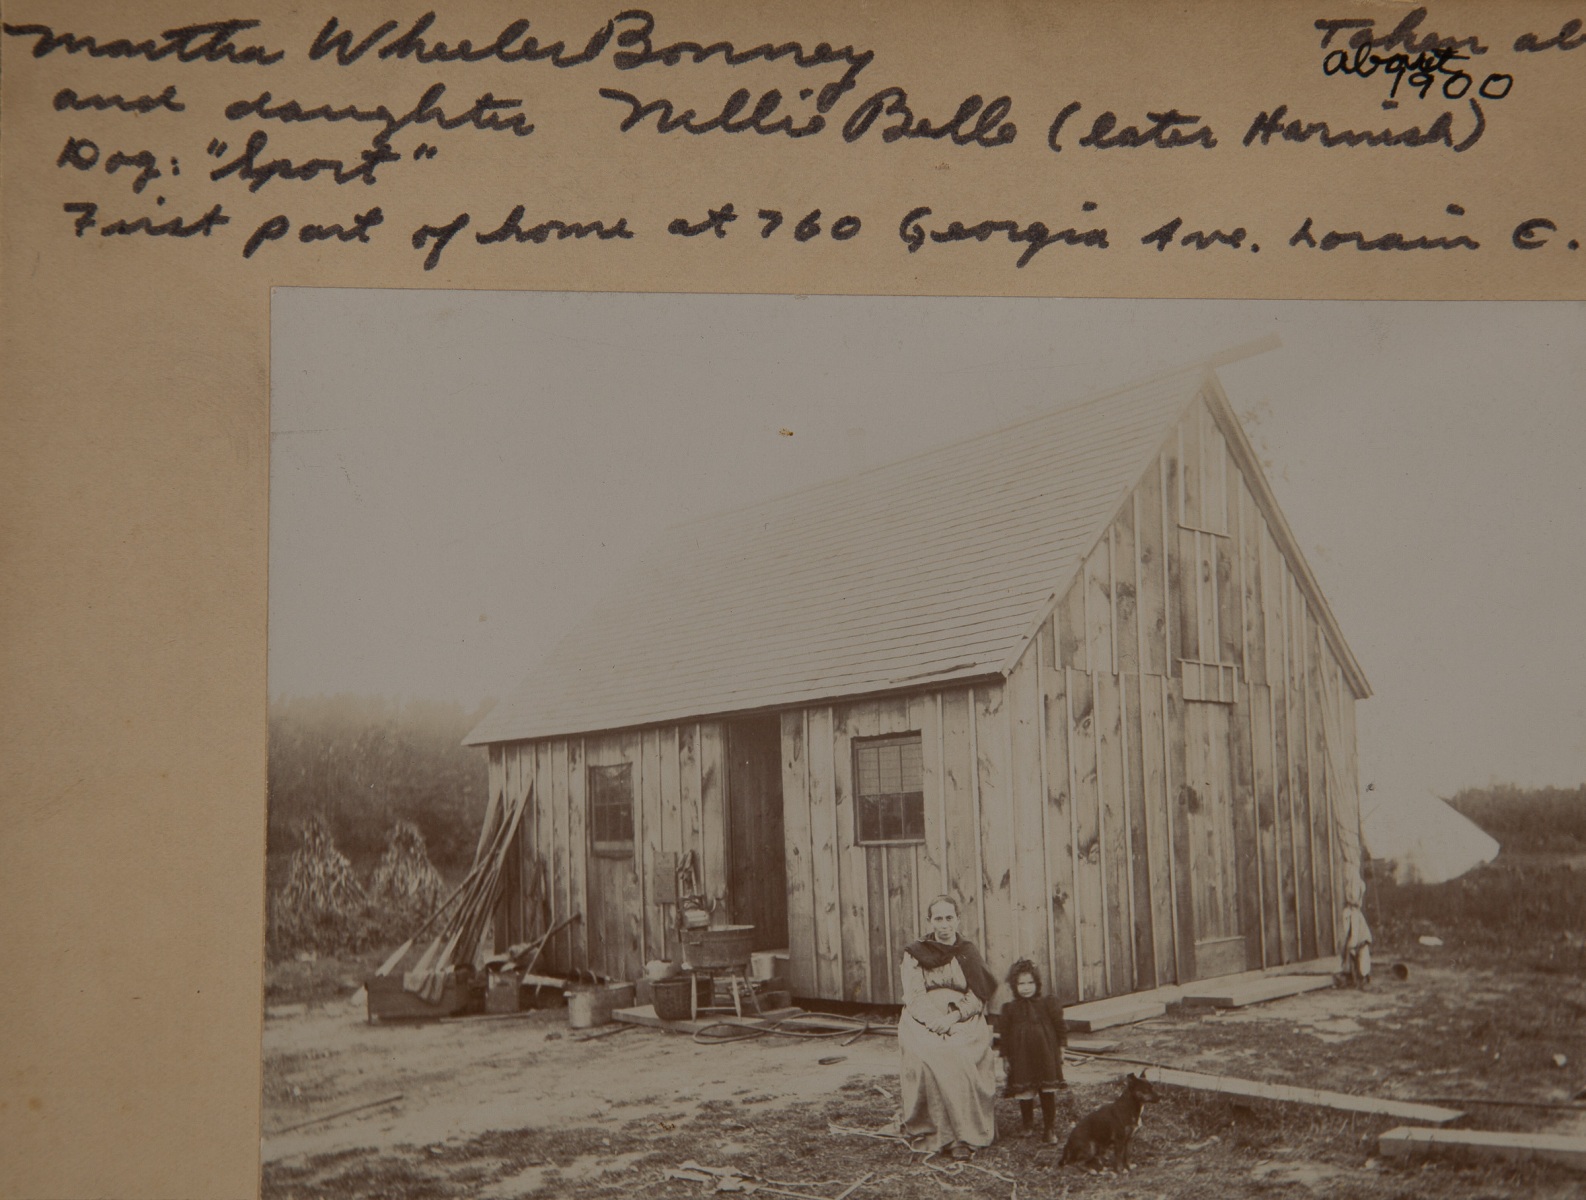 1900, "Taken about 1900, Martha Wheeler Bonney and daughter Nellie Belle (later Harnish), Dog: "Sport", First part of home at 760 Georgia Ave. Lorain, O." labeled by John Malcolm, note written by Nellie B Harnish "Nellie B, dog Sport and Mother Martha Jane Bonney, first part of home built 1899 taken about 1900 "